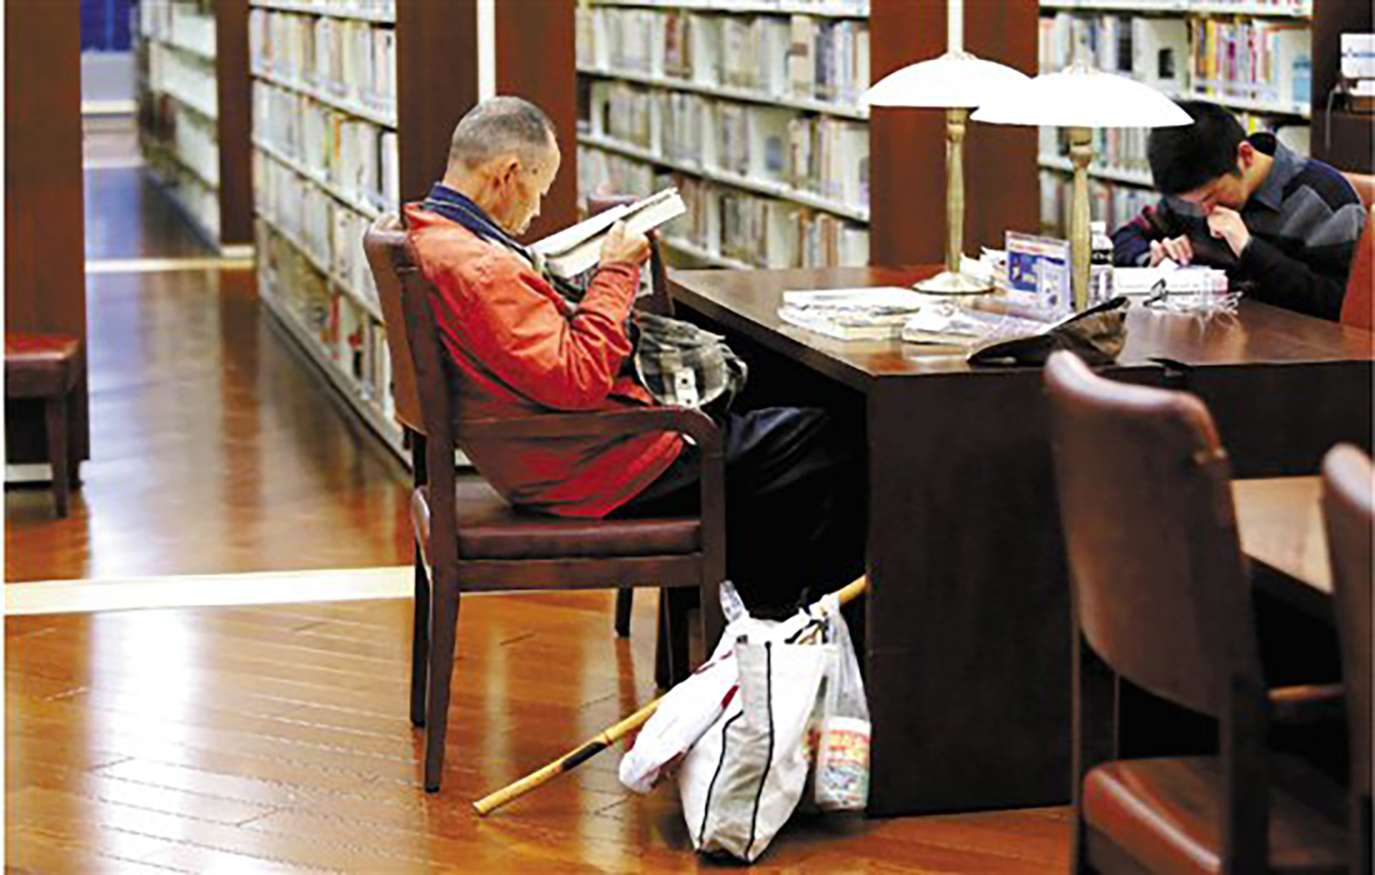 An undated photograph shows Wei Sihao reading in the Hangzhou library. Photo: Handout